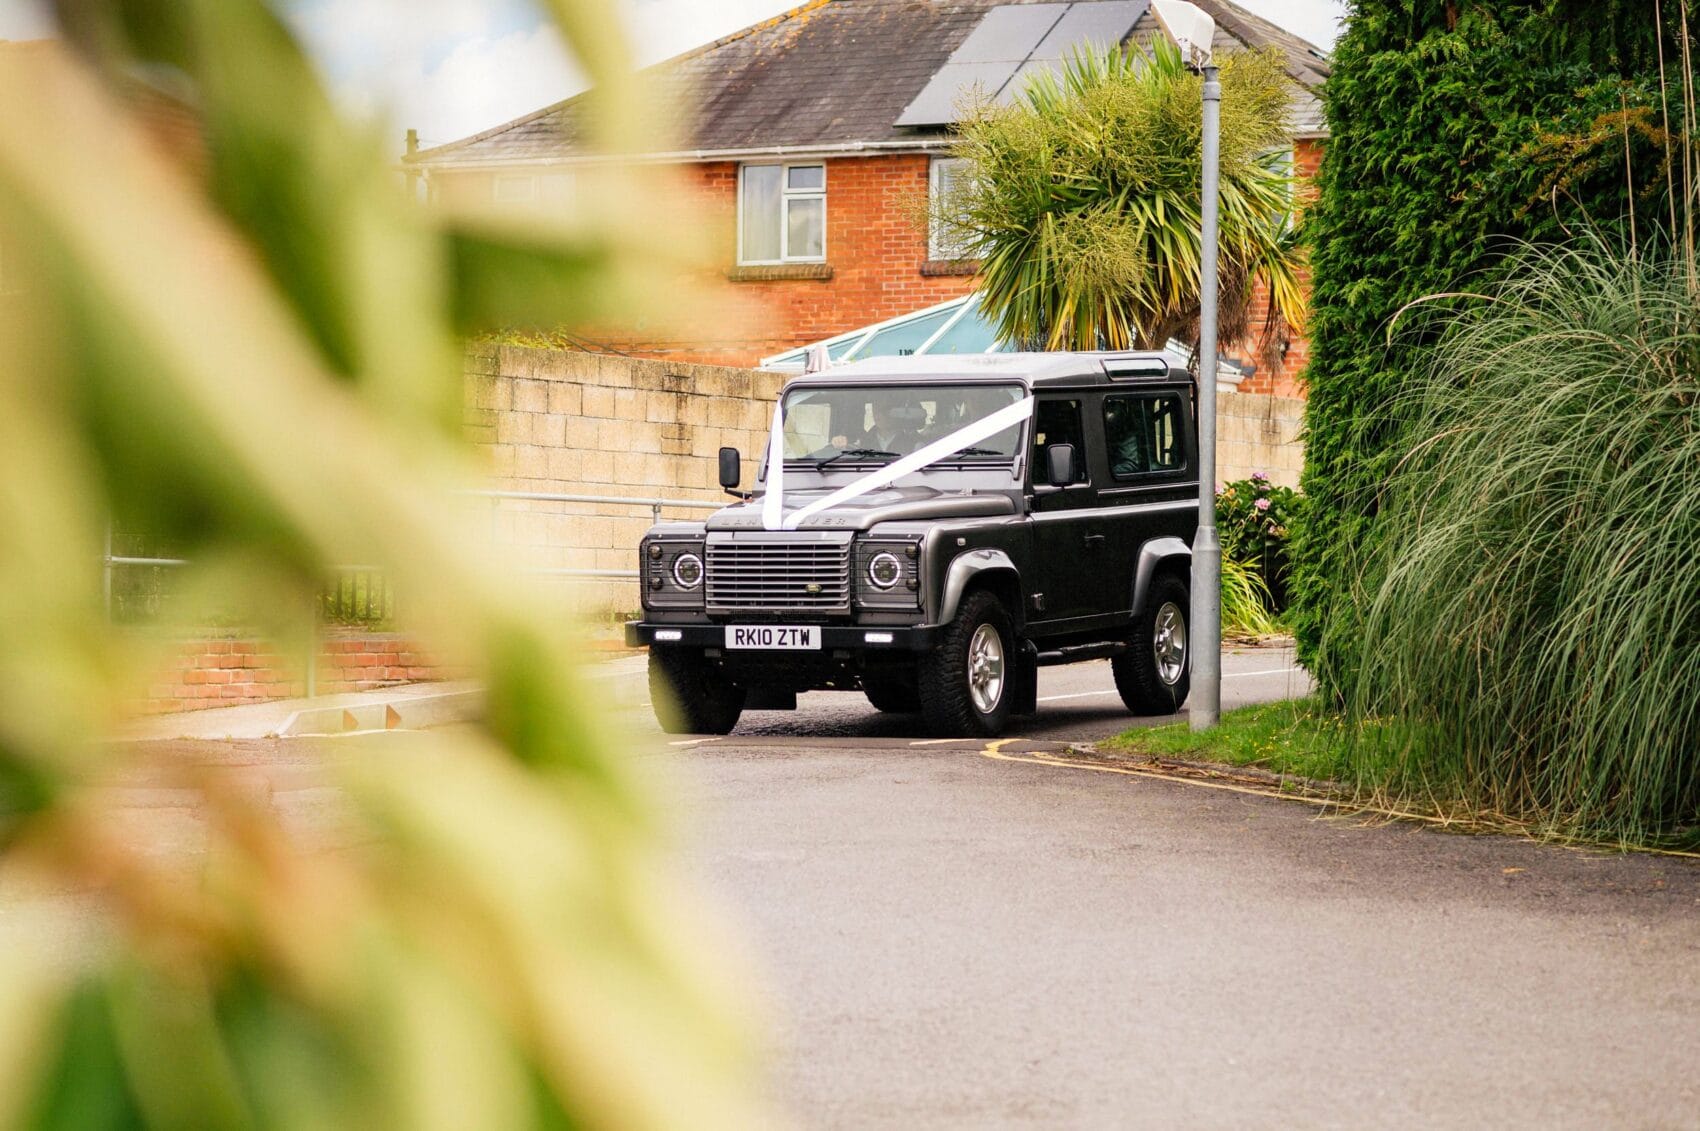 Land Rover defender arrives at St Mary's Catholic Church with the bride